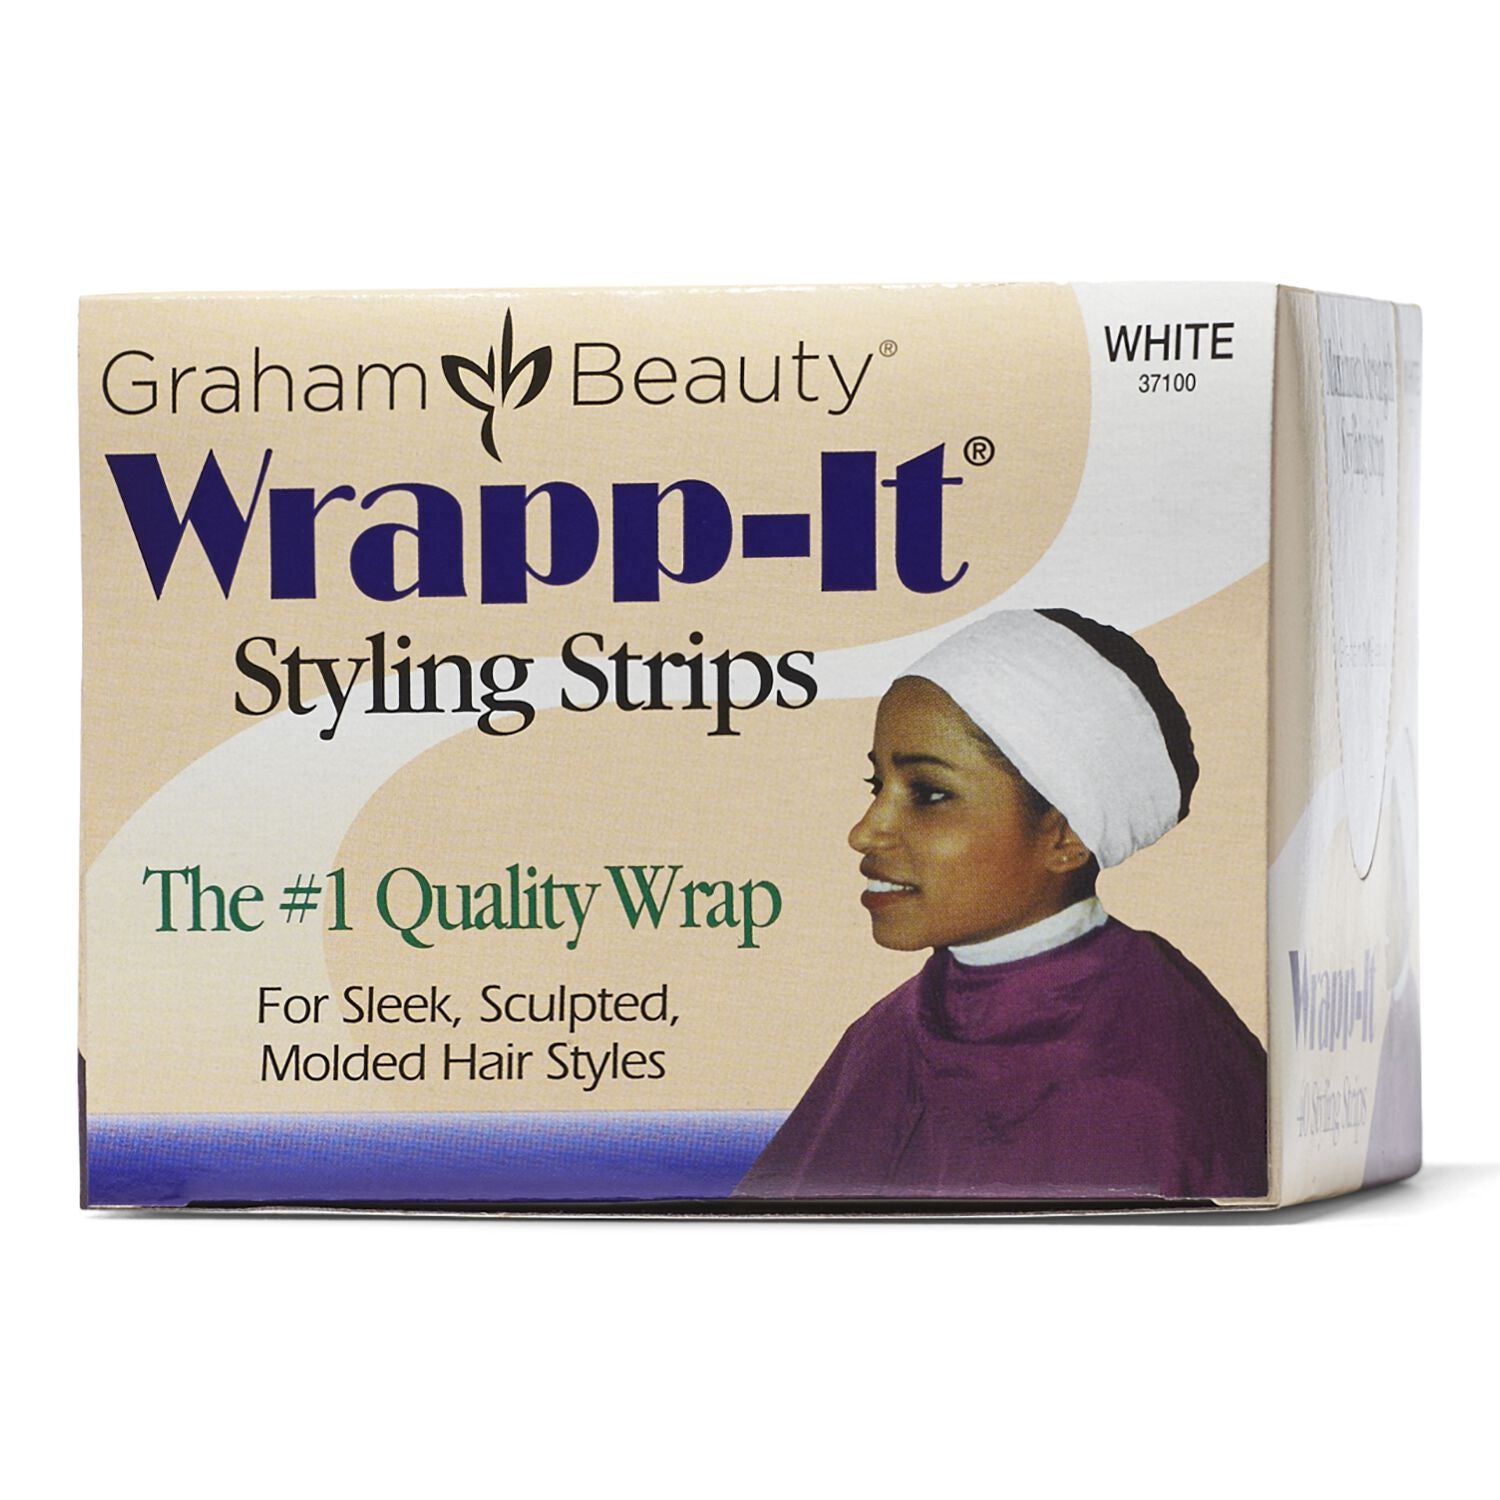 Graham Professional Beauty Wrapp-It White Styling Strips